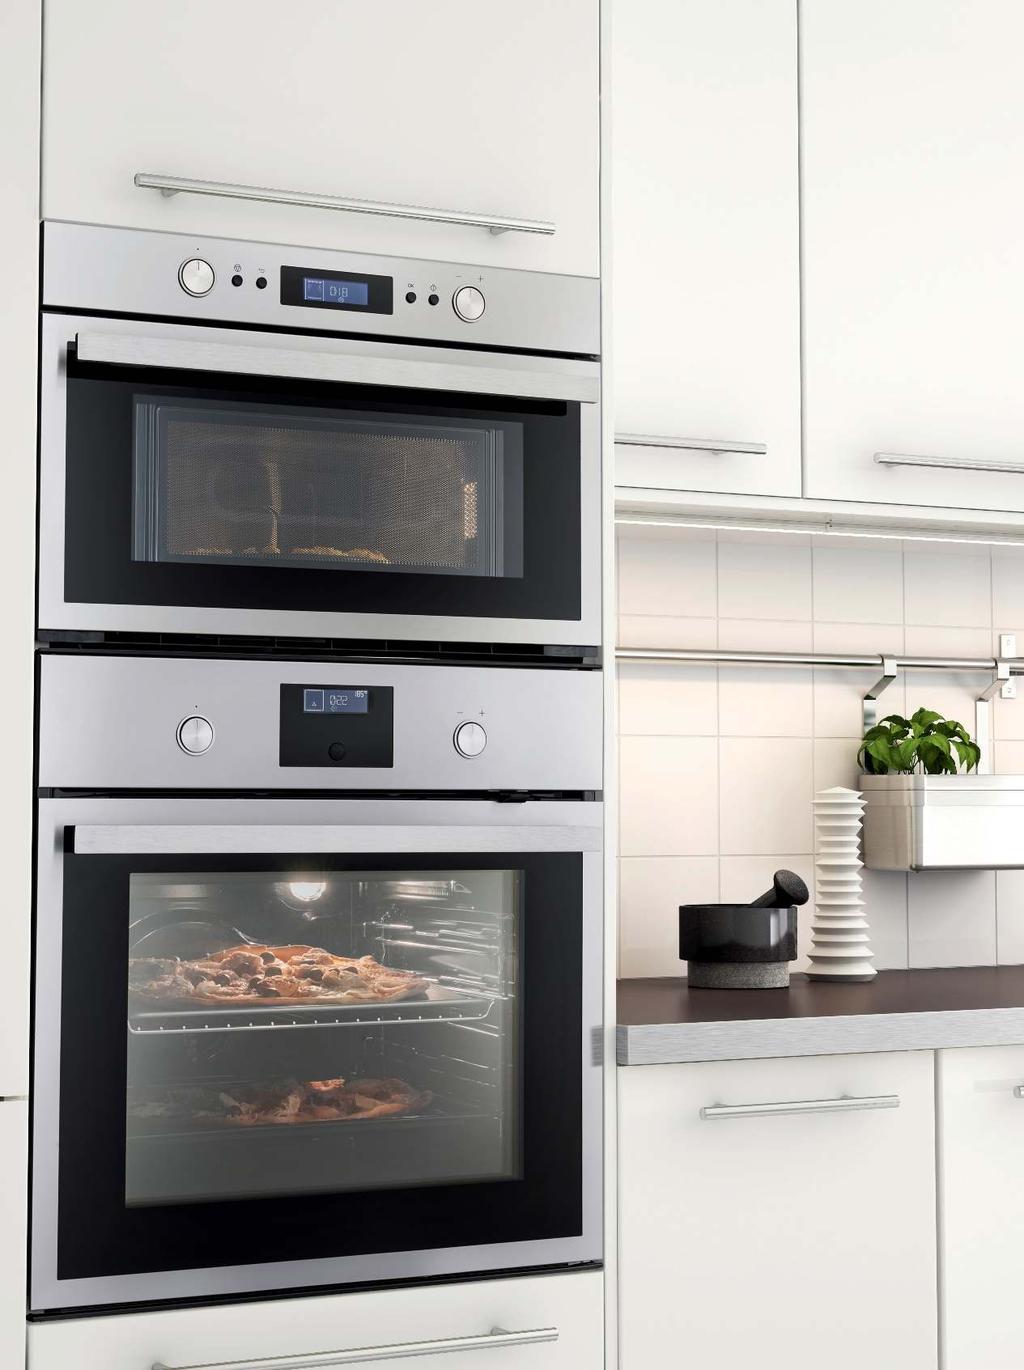 MICROWAVE OVENS When the hustle of everyday life leaves you with the need for speed, a microwave or microwave combi oven is a perfect choice in every way.